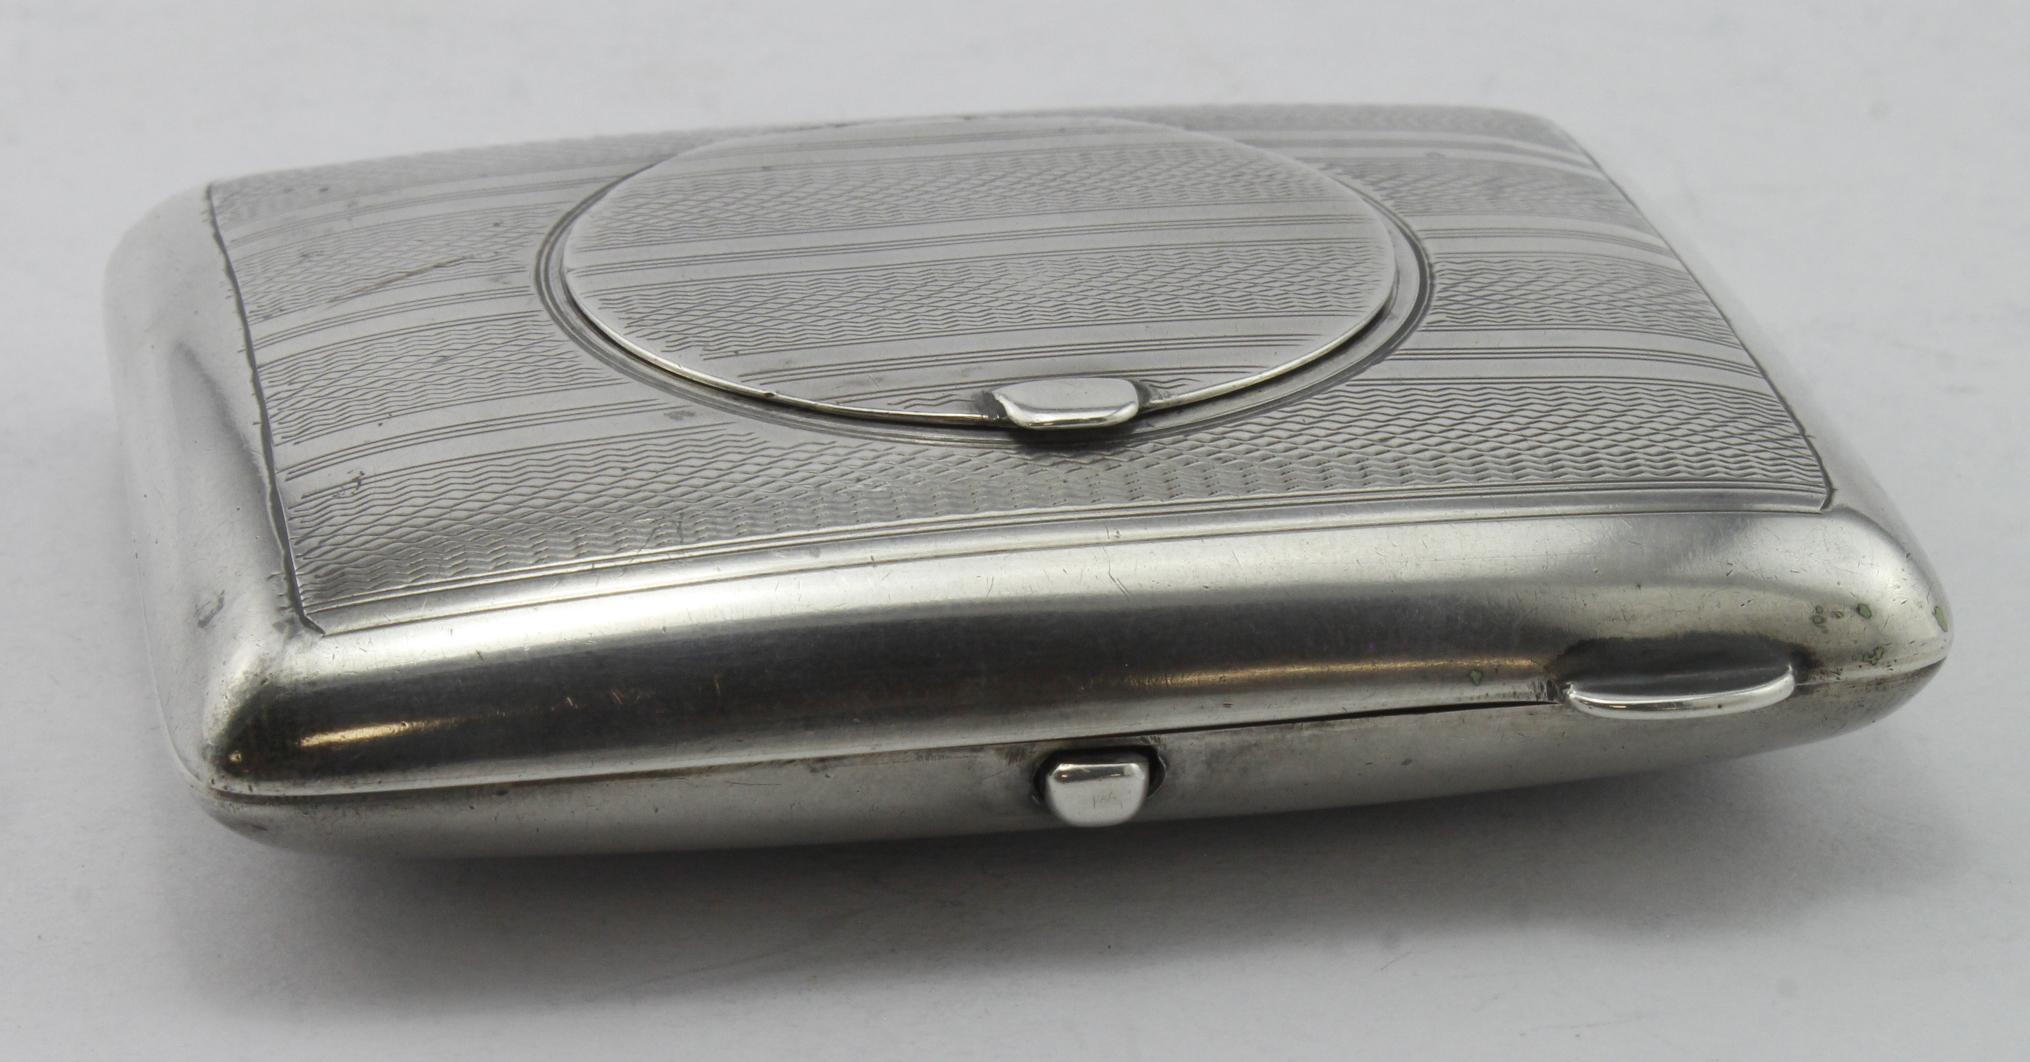 Unusual silver cigarette case which includes an inset mirror, the case is called "The Vanity" & "